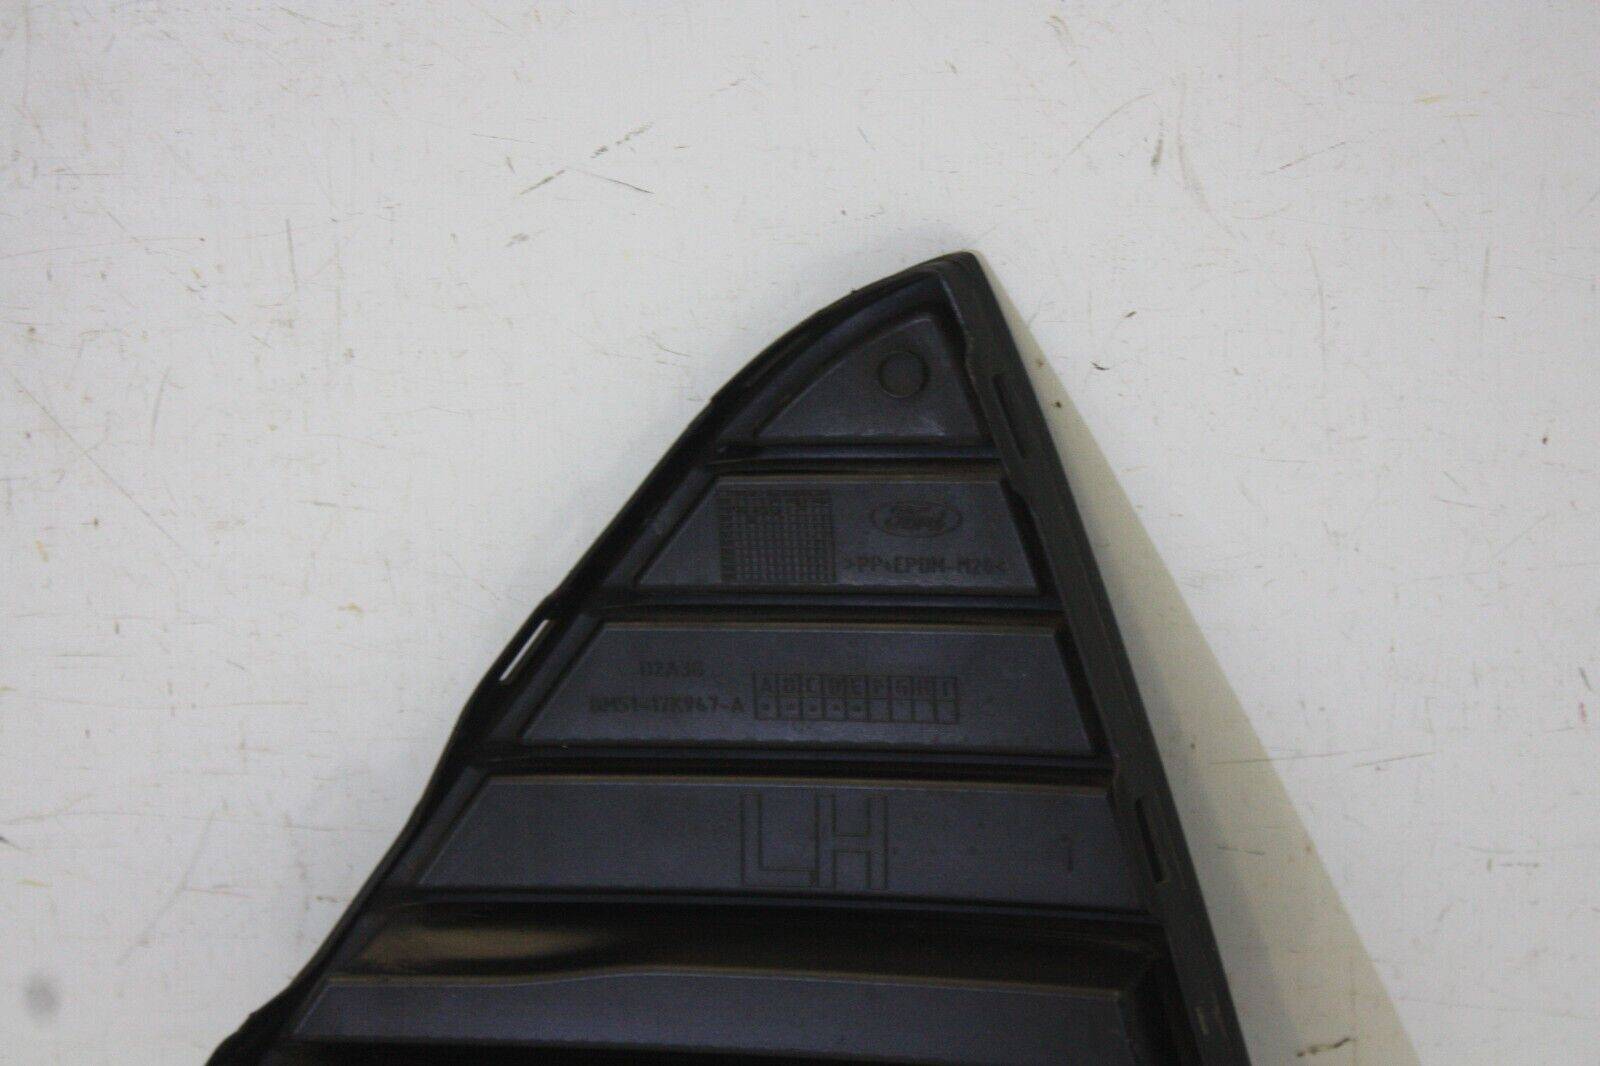 Ford-Focus-Front-Bumper-Left-Grill-2011-TO-2014-BM51-17947-A-Genuine-175574727982-6